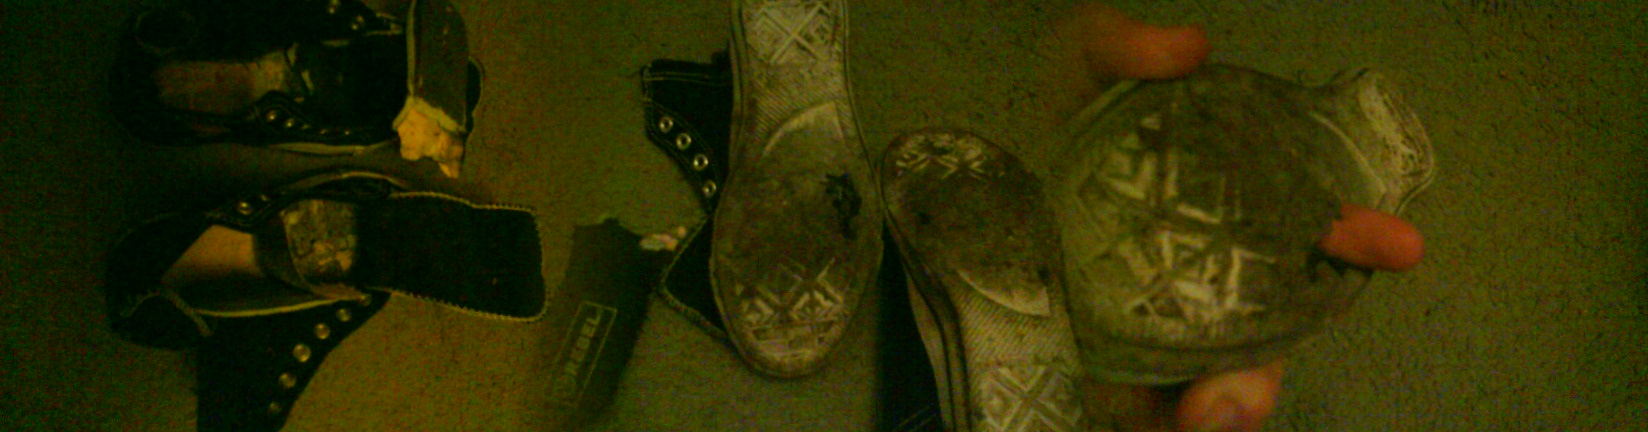 Destroyed My Shoes